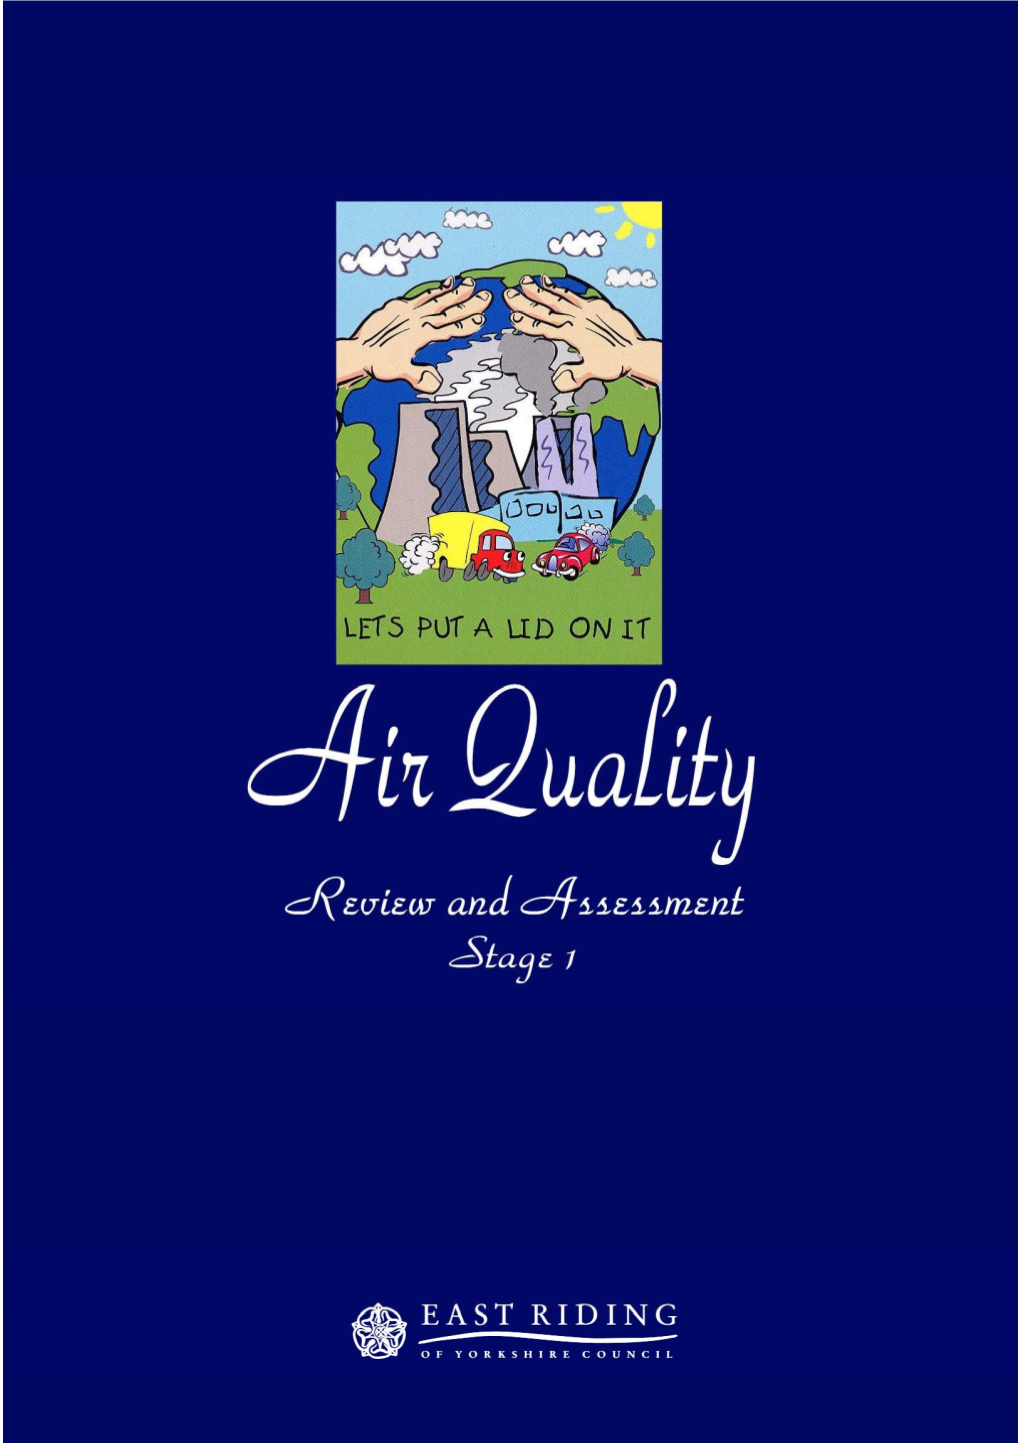 Stage 1 Air Quality Review and Assessment